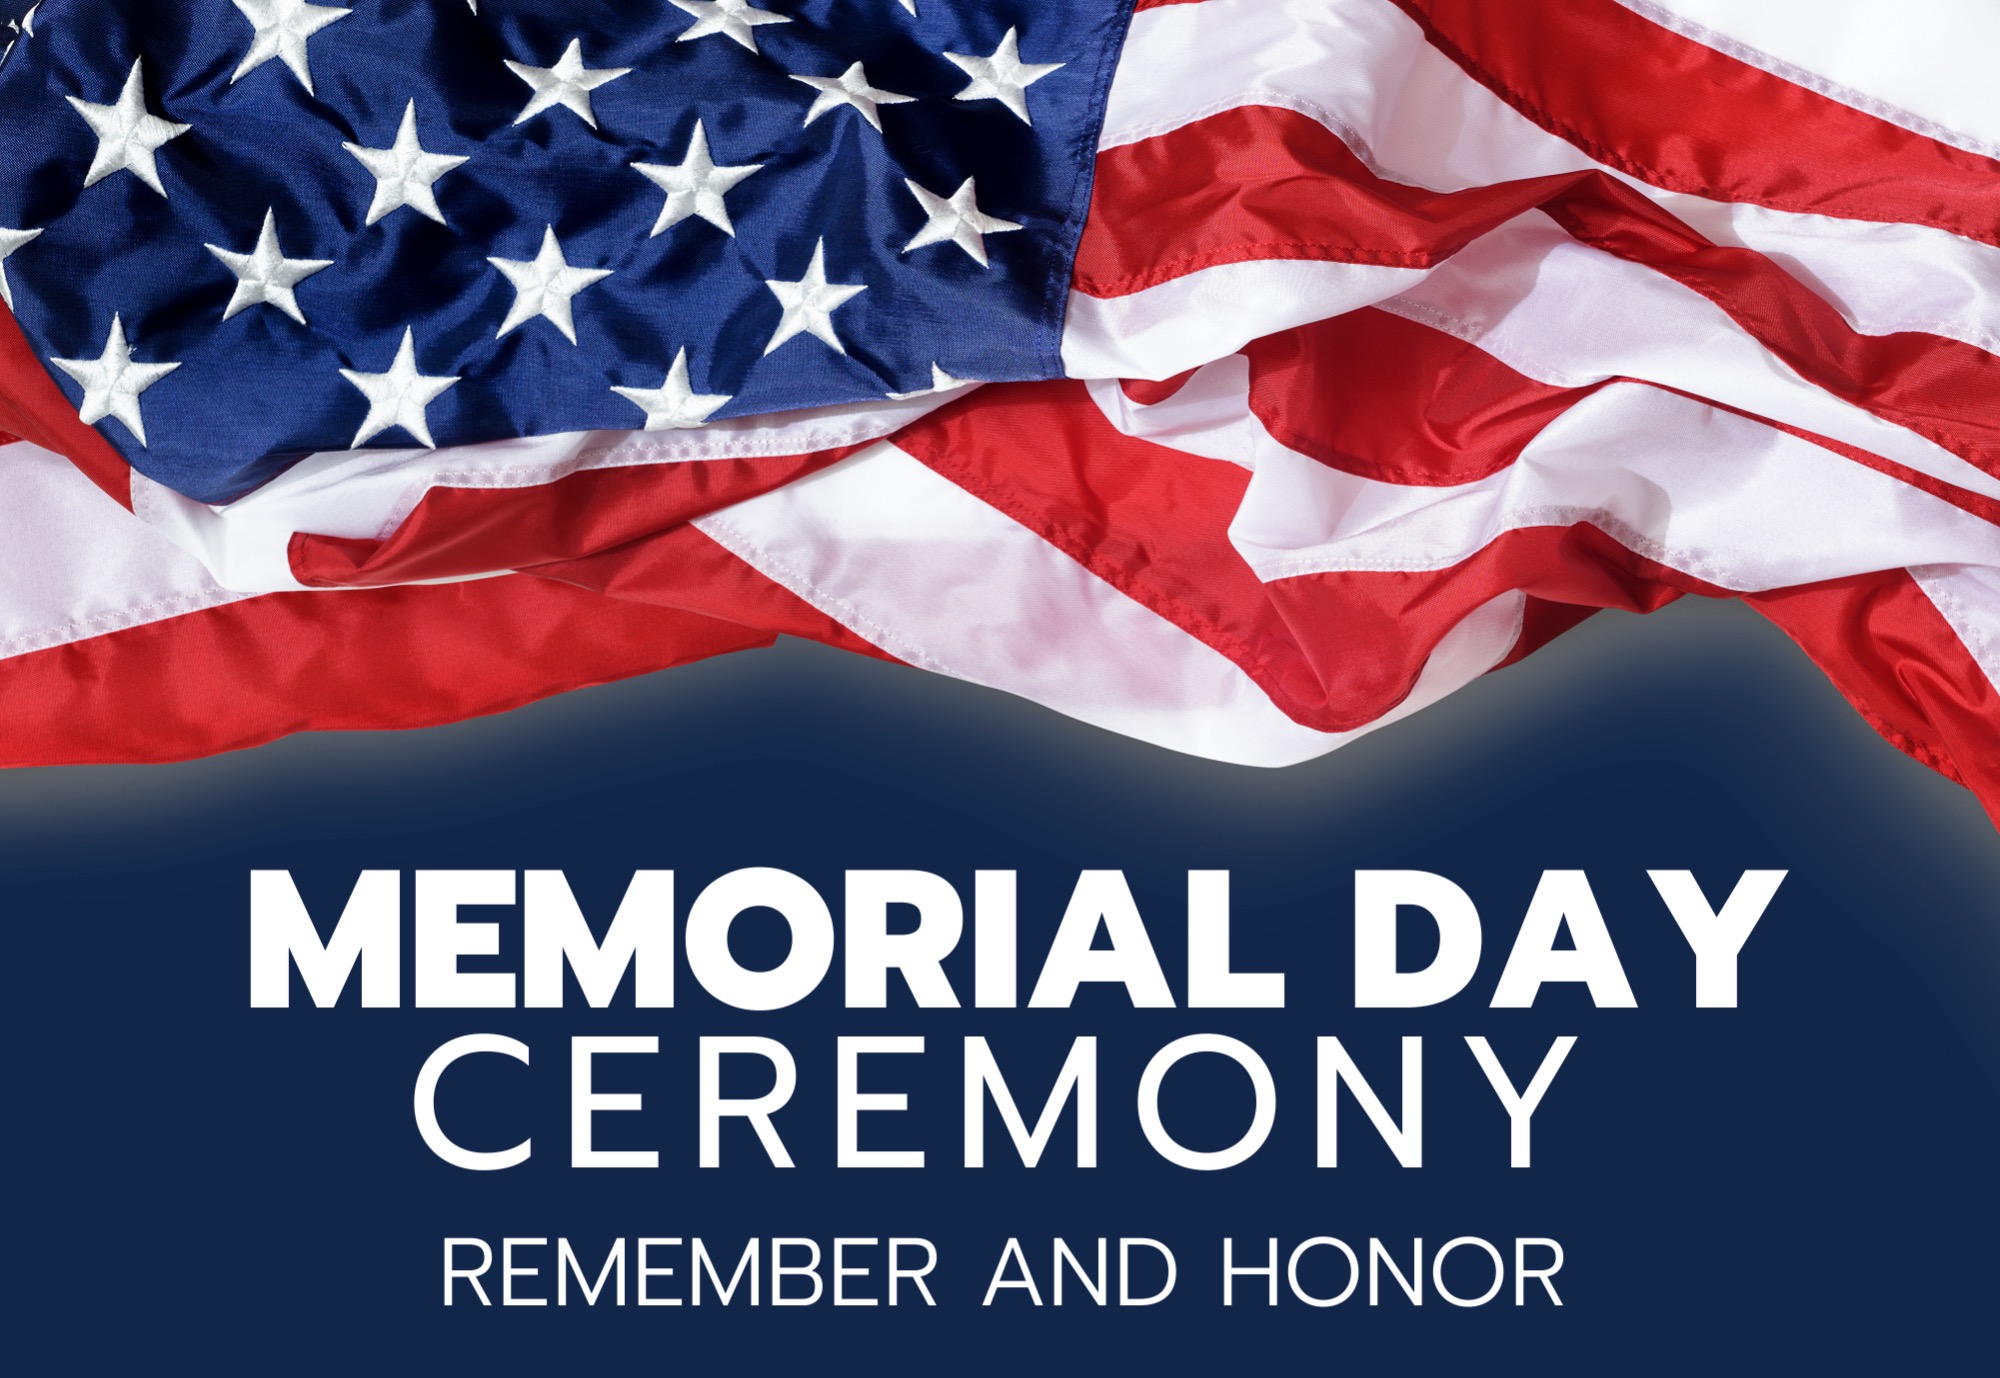 http://Memorial%20Day%20Ceremony%20graphic%20with%20an%20American%20flag.